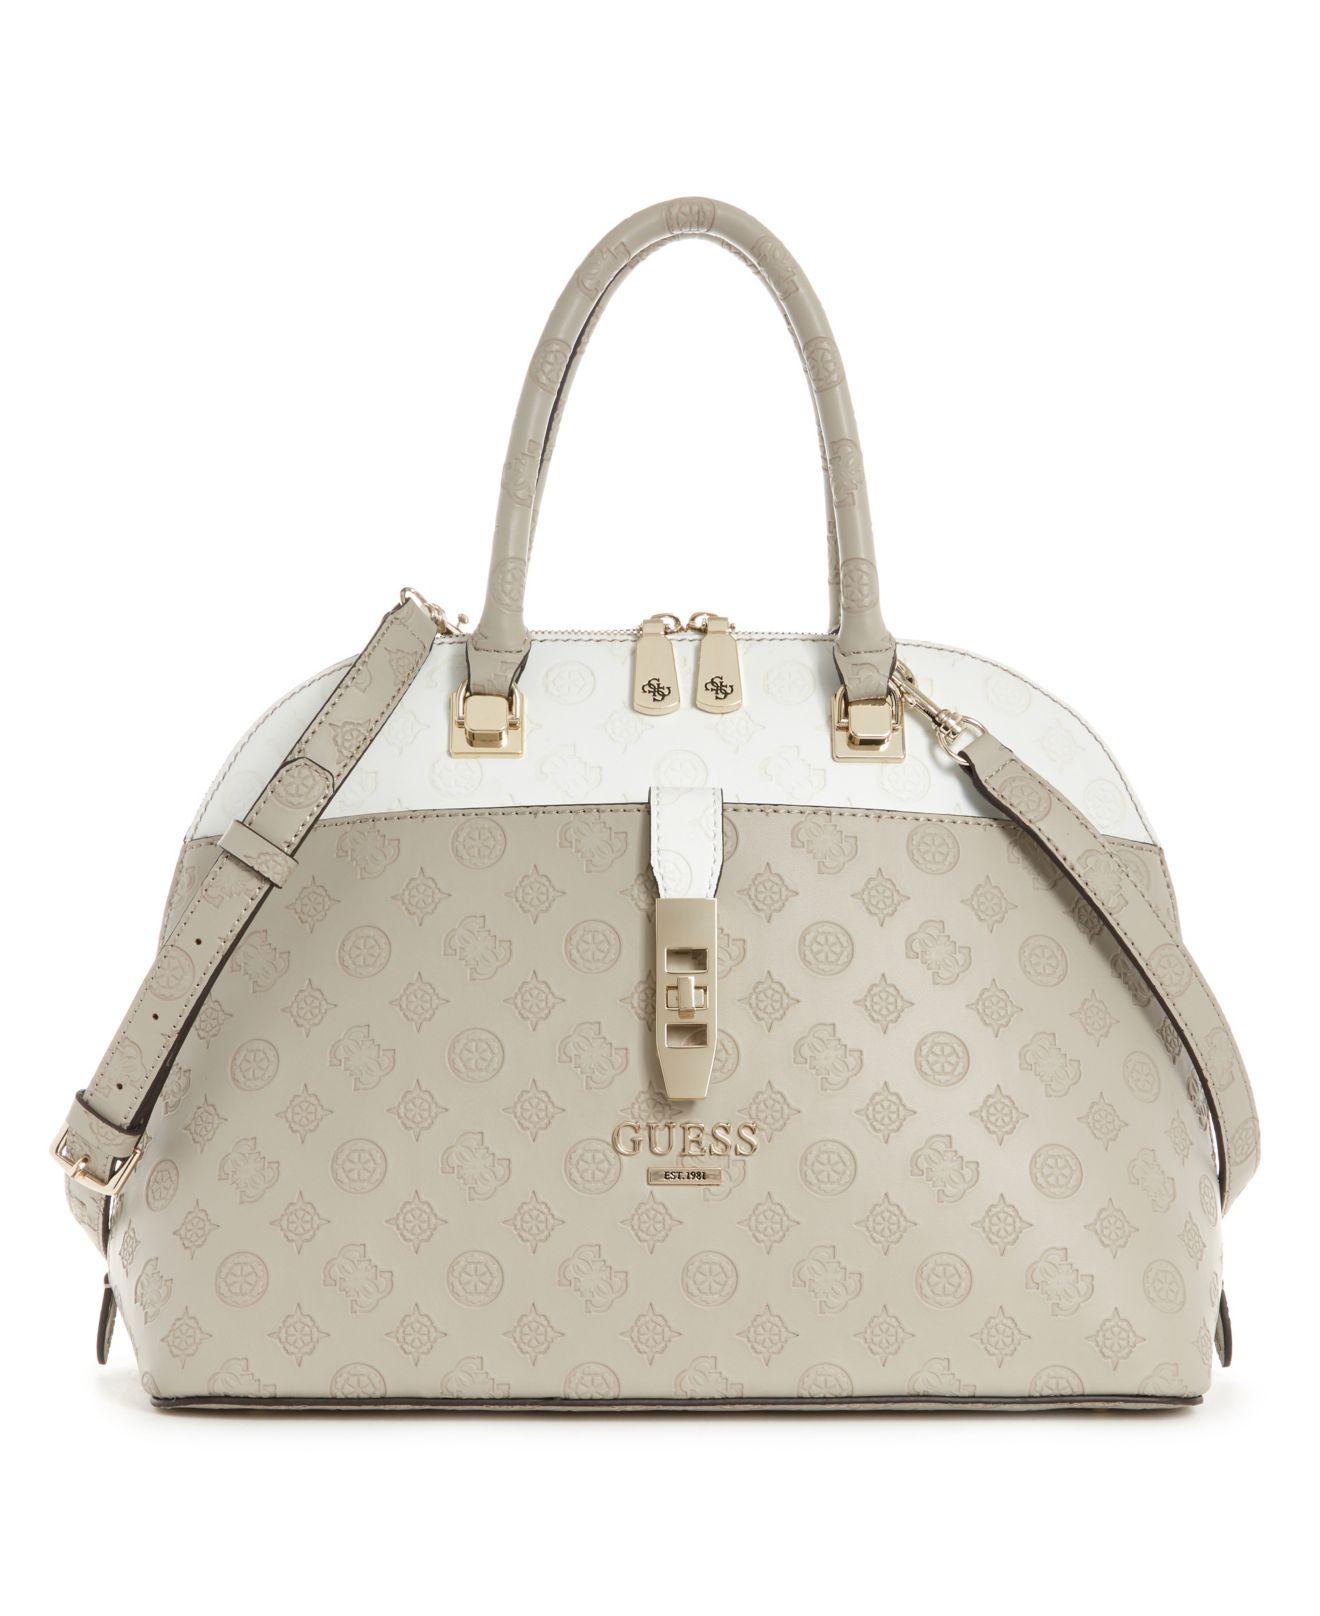 Guess Peony Classic Large Dome Satchel in Metallic | Lyst